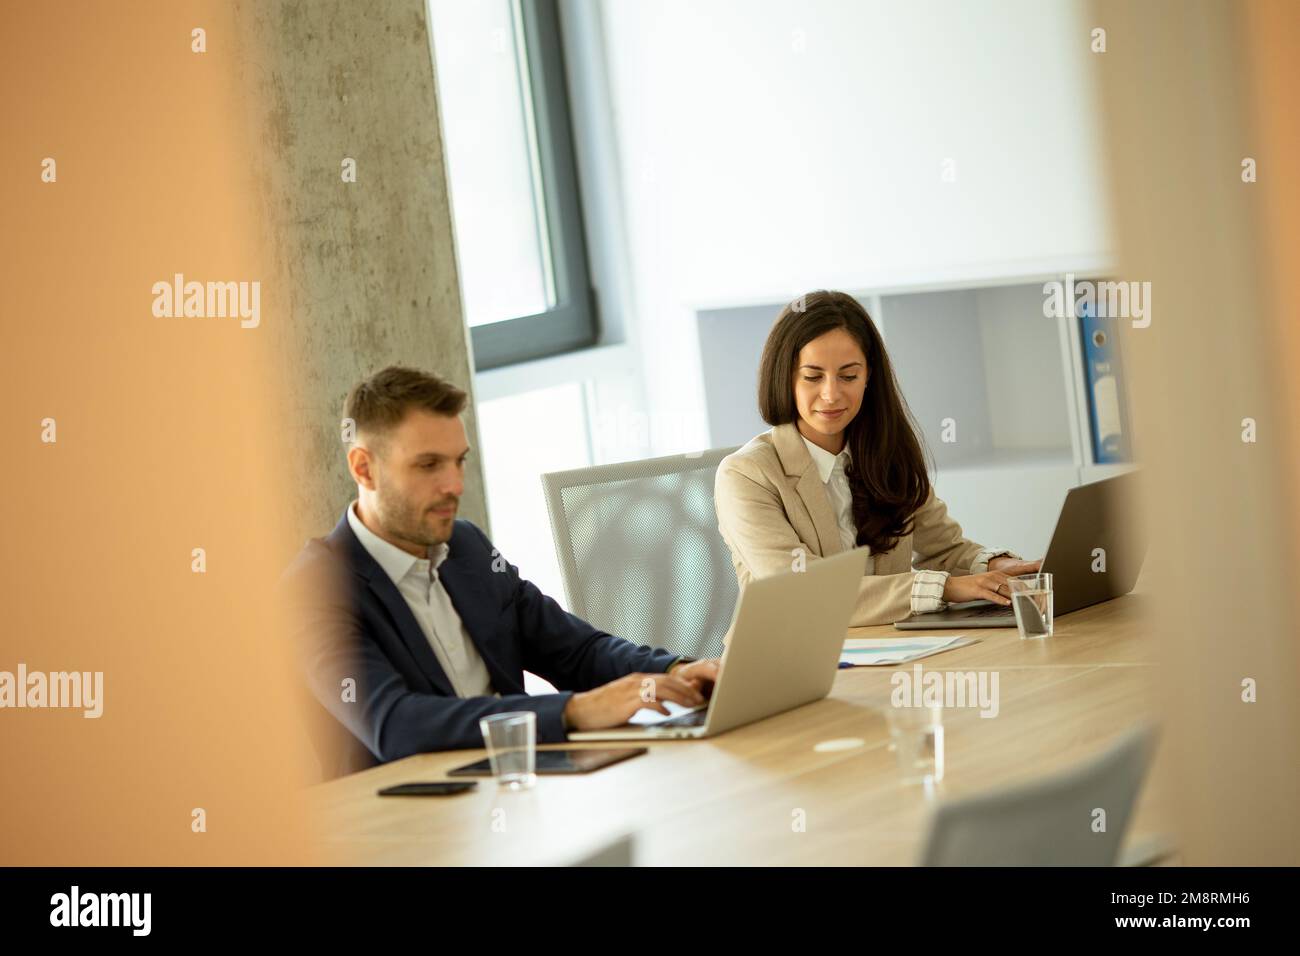 Businessman and businesswoman working together in office Banque D'Images